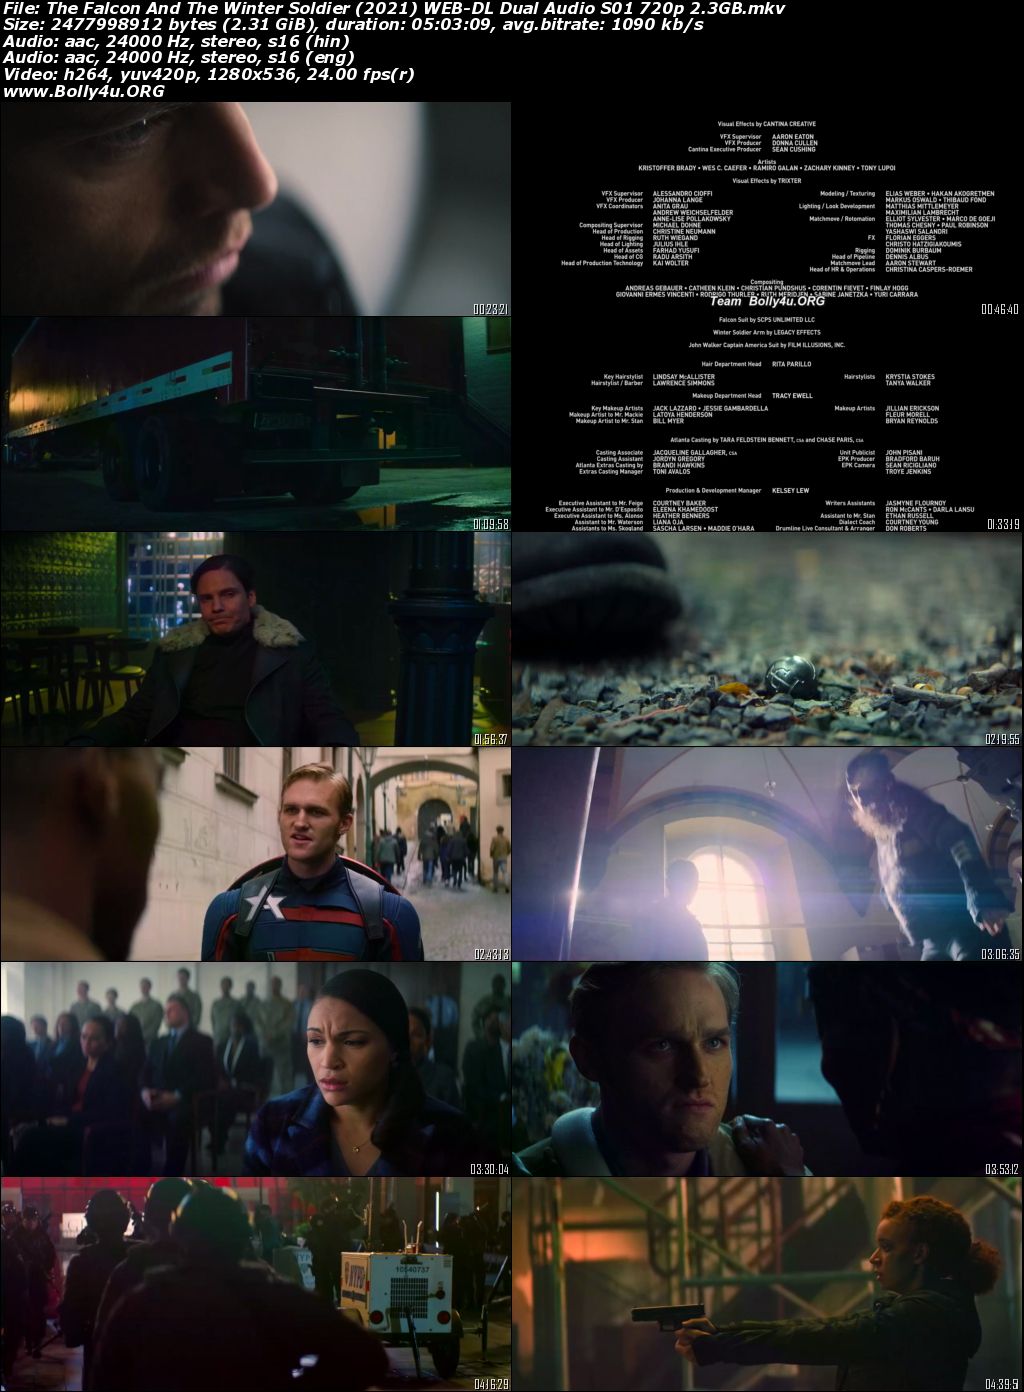 The Falcon And The Winter Soldier 2021 WEB-DL 999Mb Hindi Dual Audio S01 Download 480p